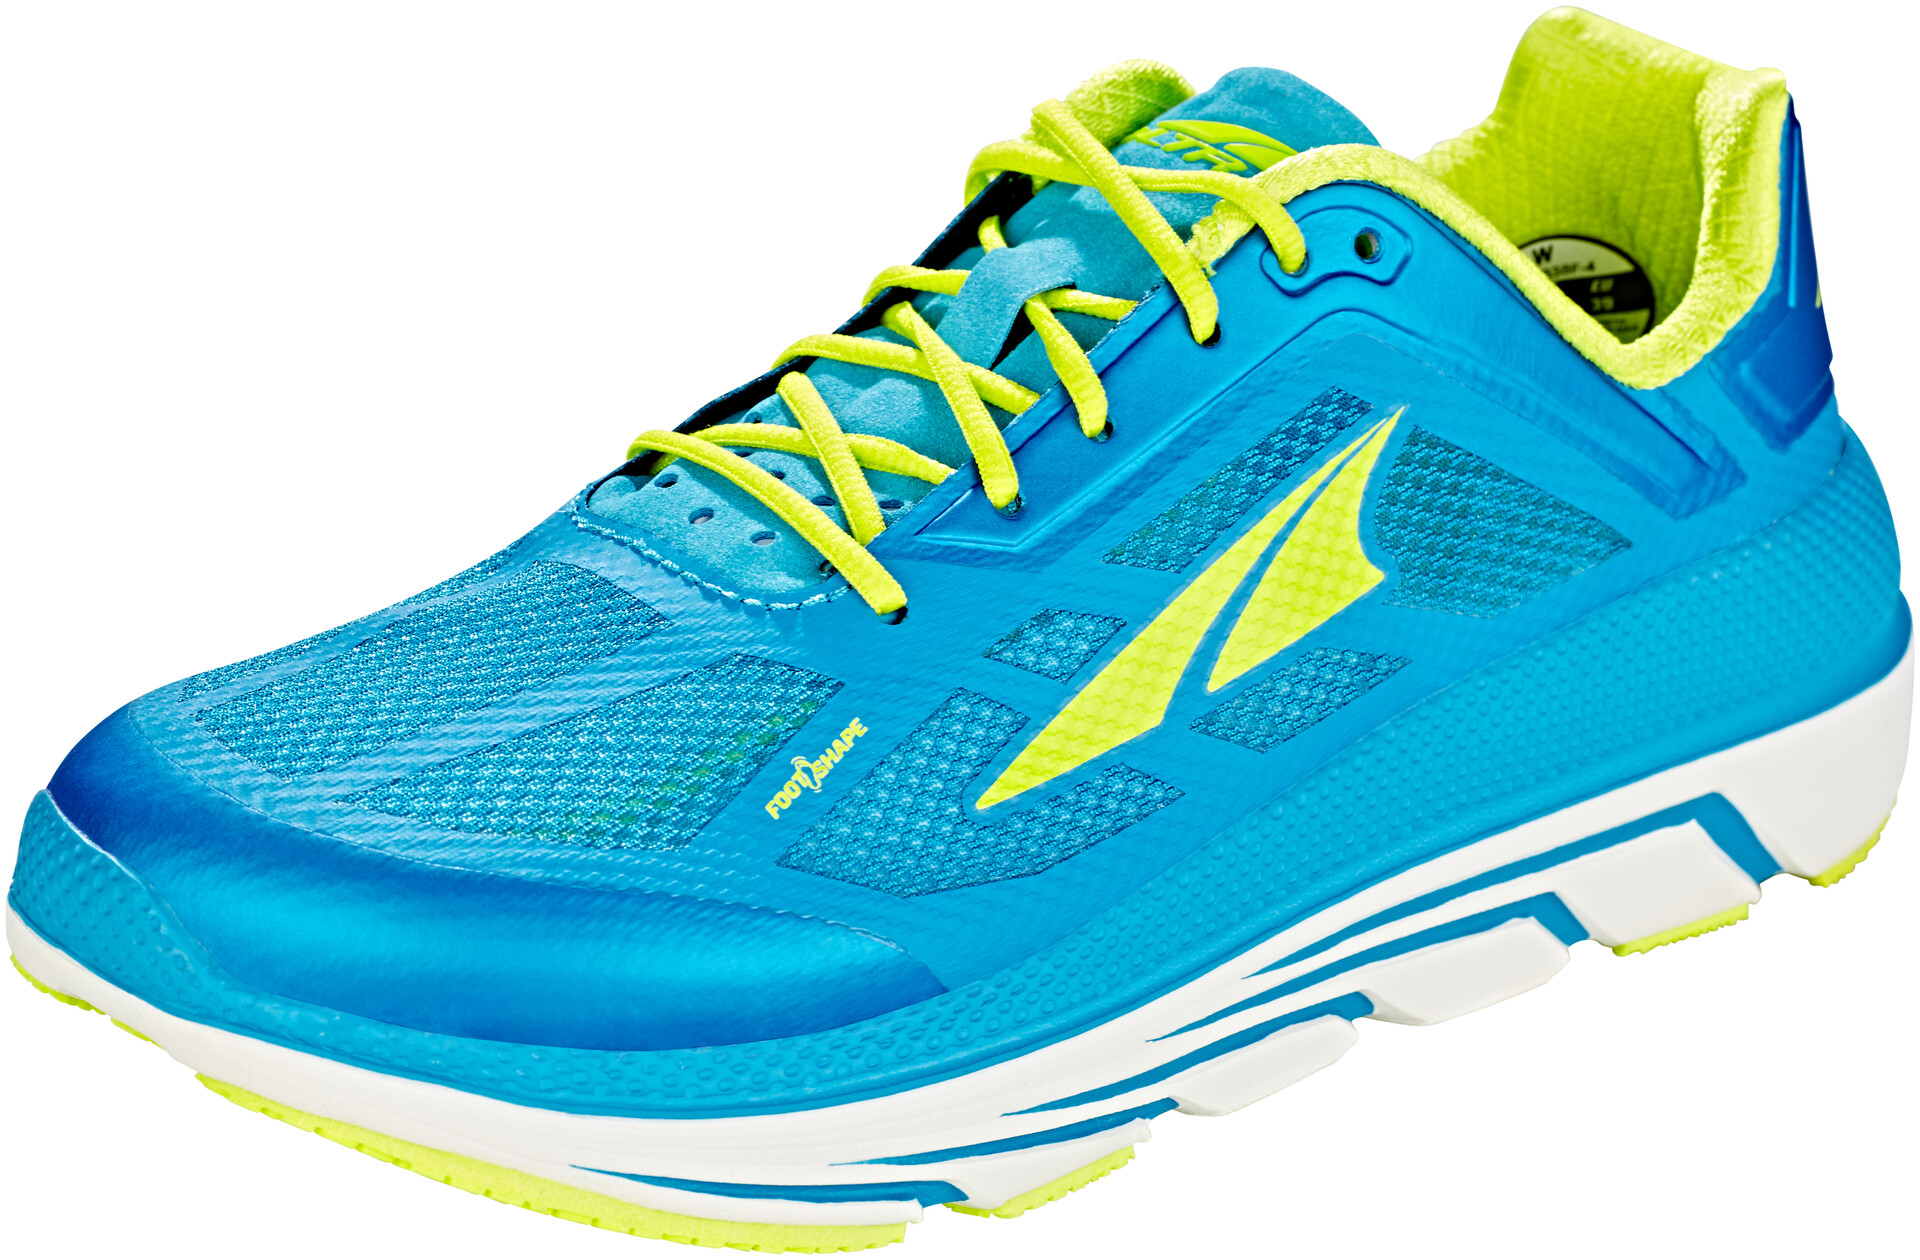 altra women's road running shoes